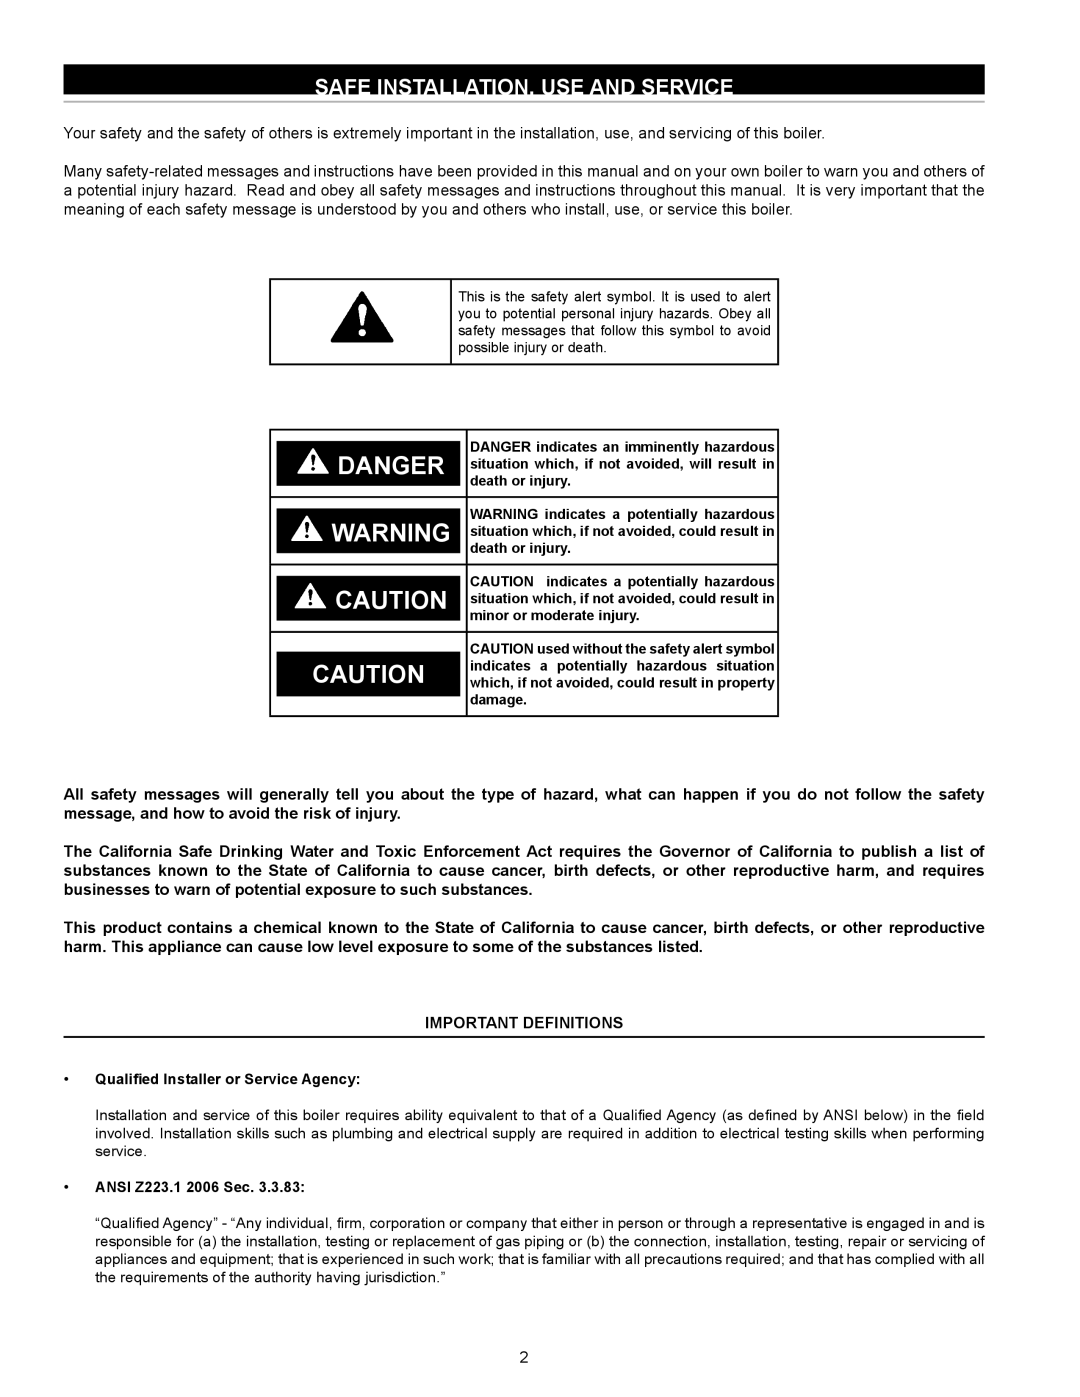 State Industries SW 37-670 instruction manual Safe Installation, Use And Service, Danger 